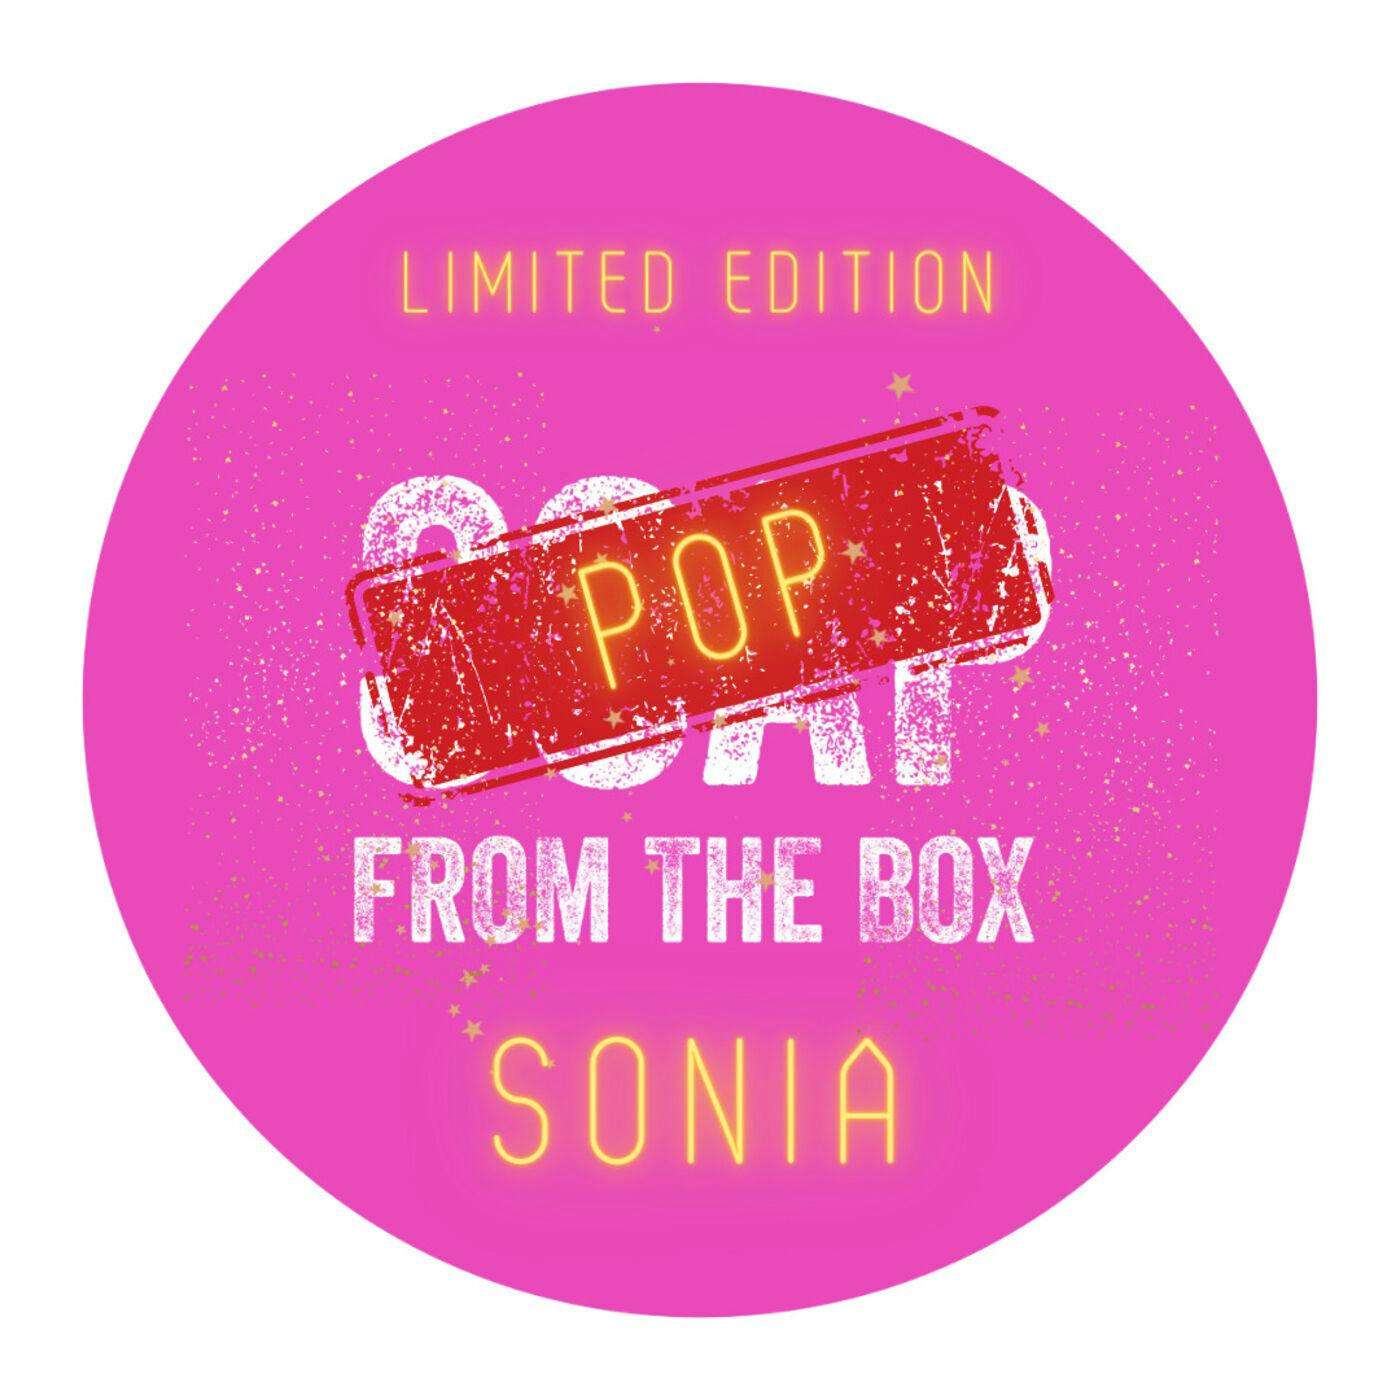 SONIA (Pop From The Box Ep 1)